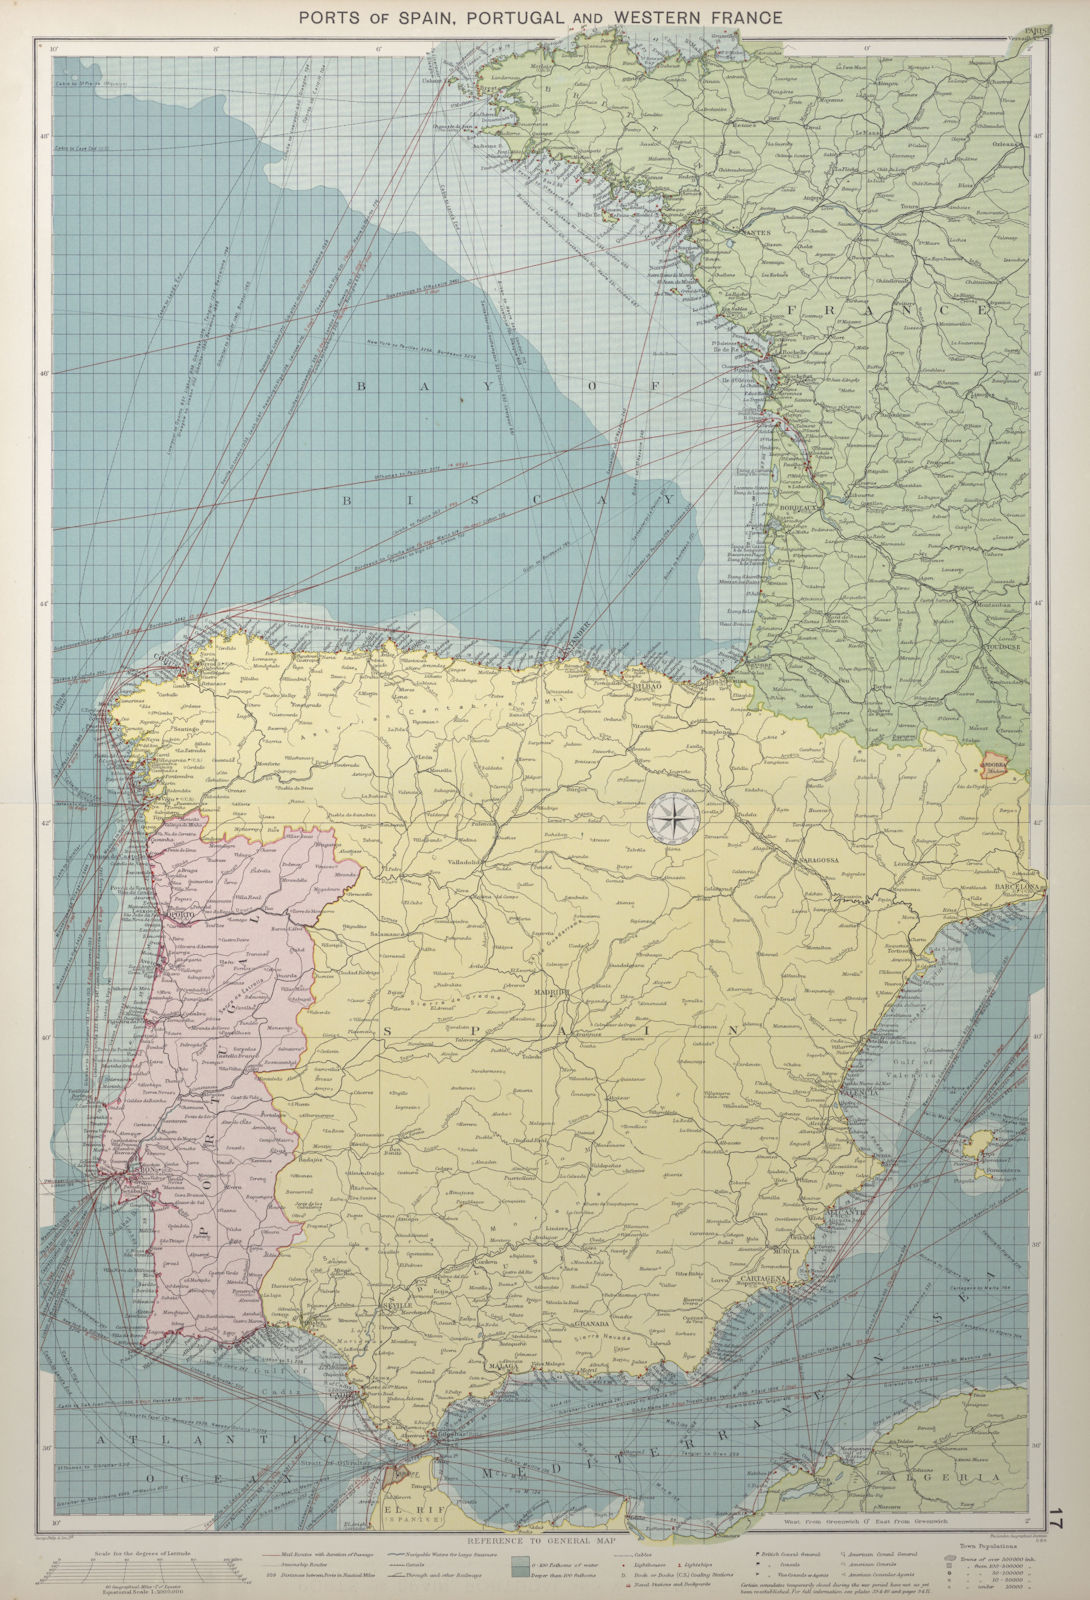 Associate Product Spain, Portugal & Western France ports sea chart. Bay of Biscay. LARGE 1927 map